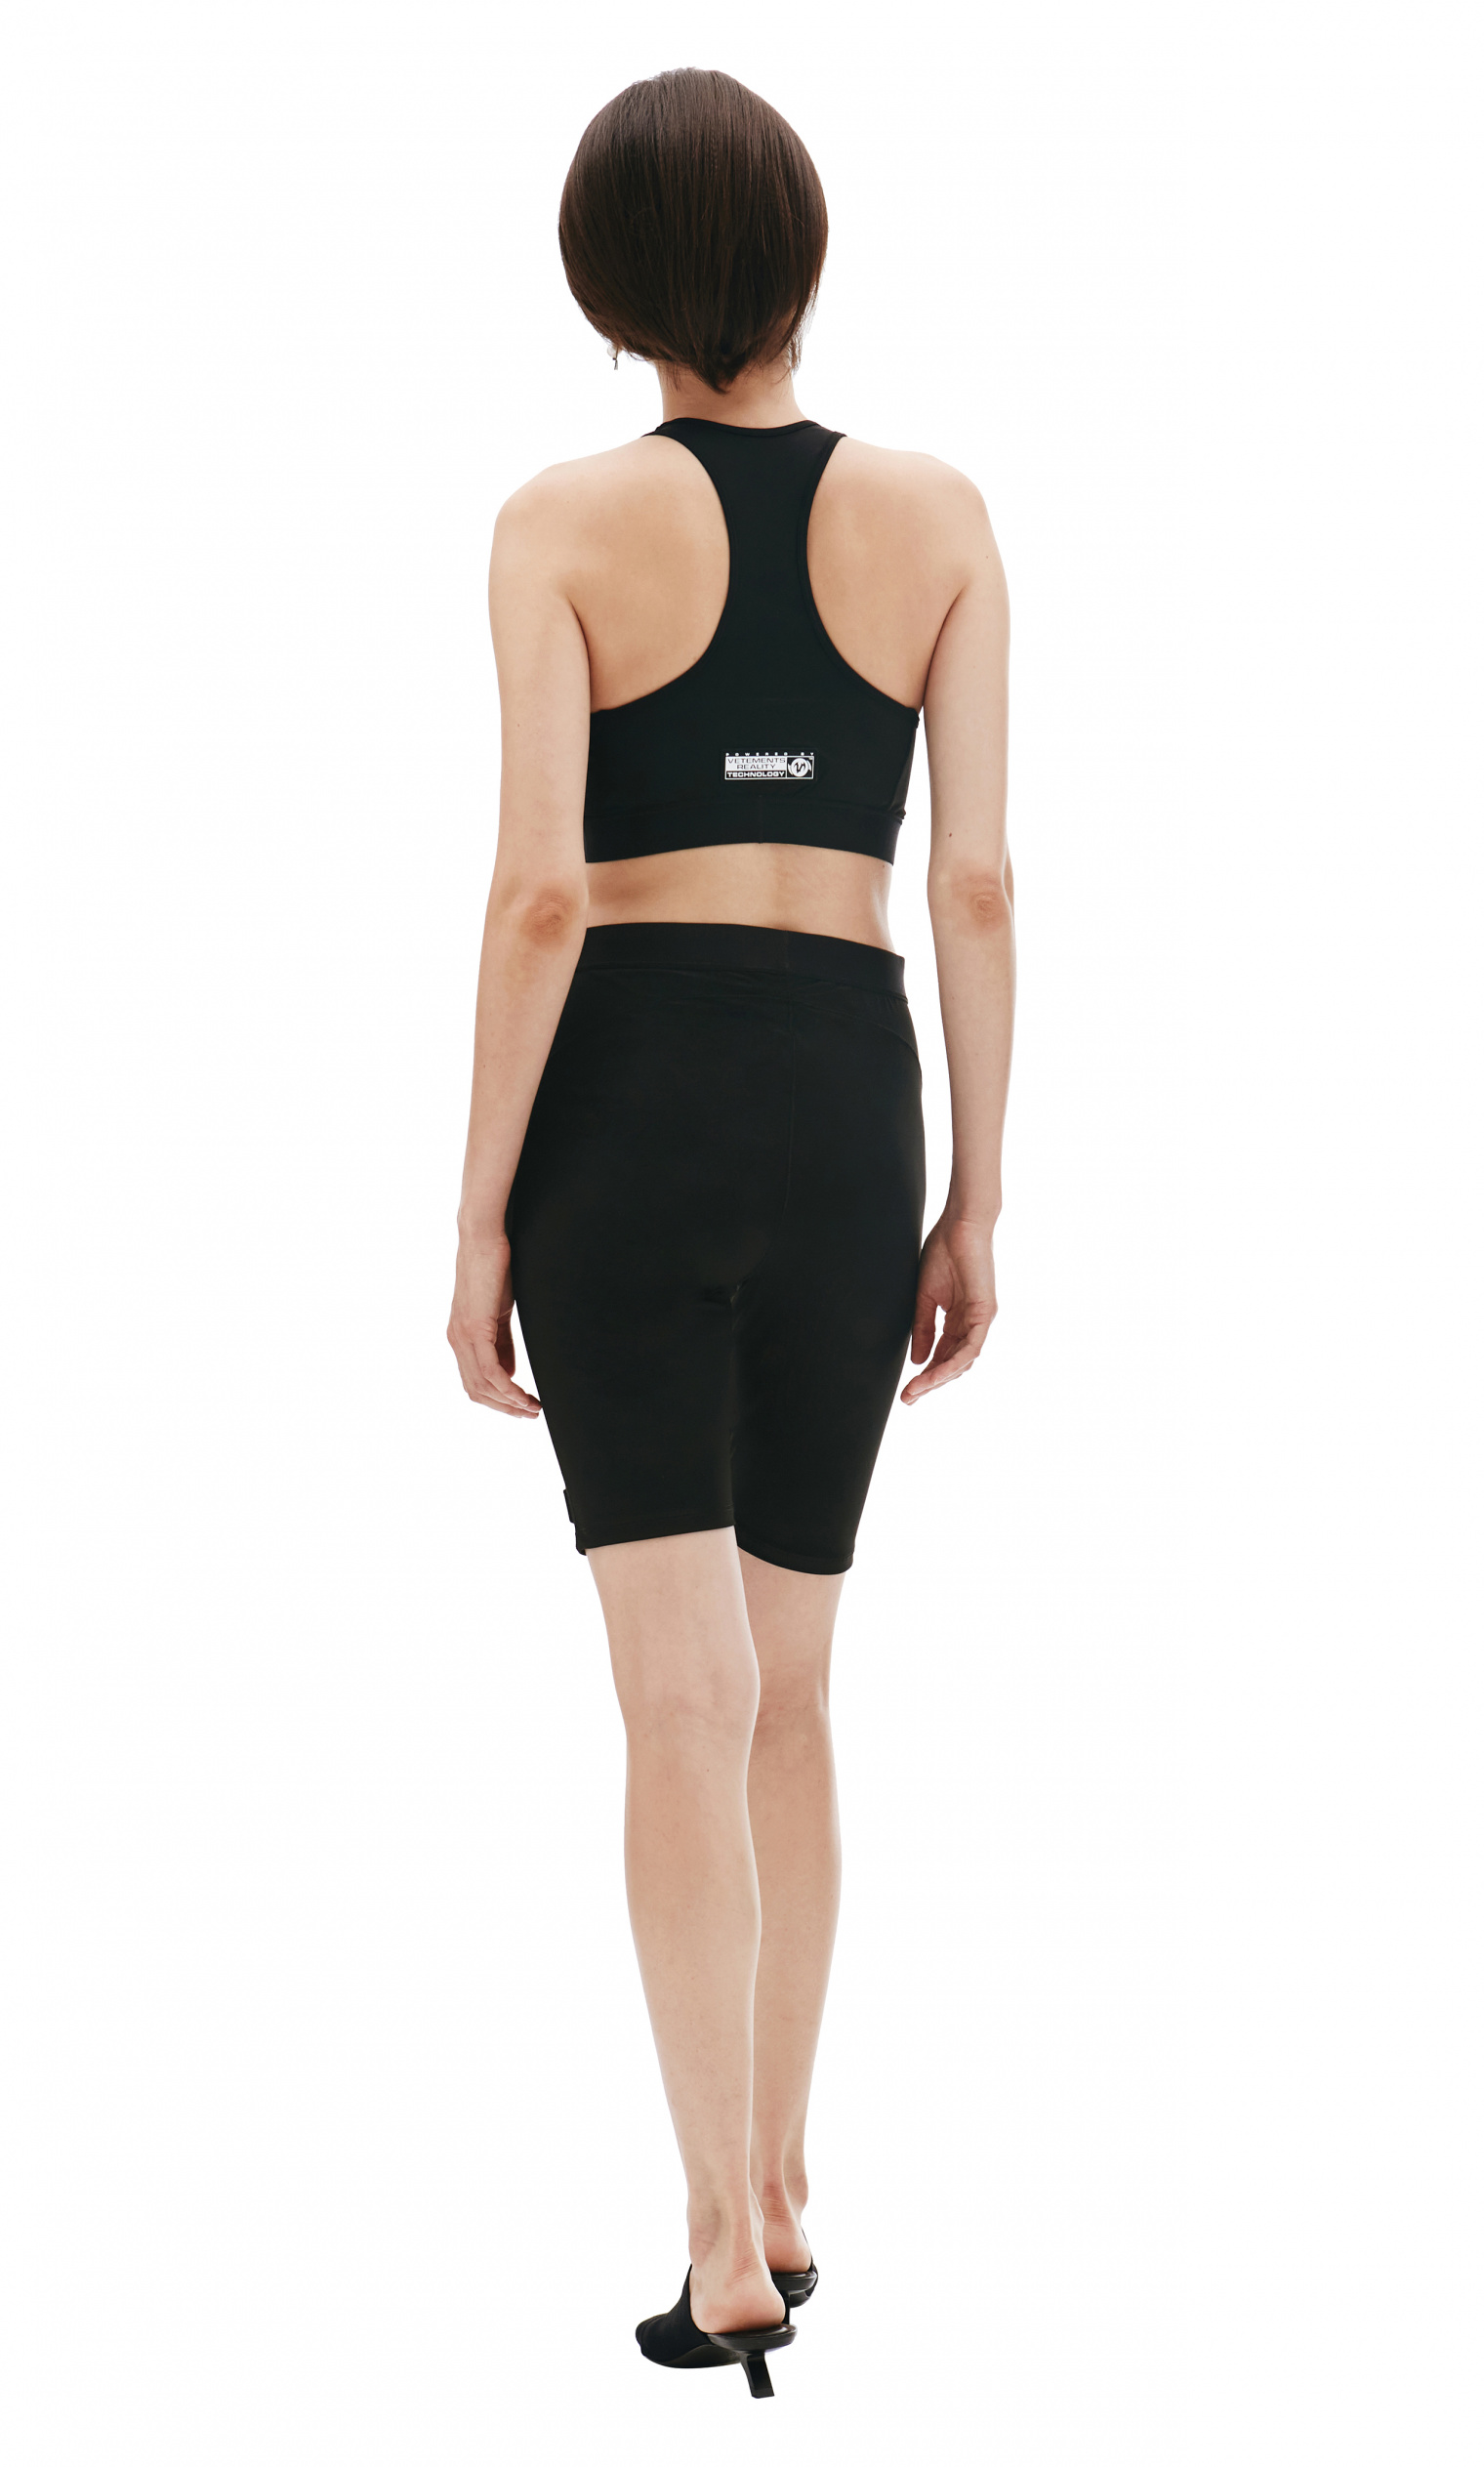 VETEMENTS Black Cropped Training Top